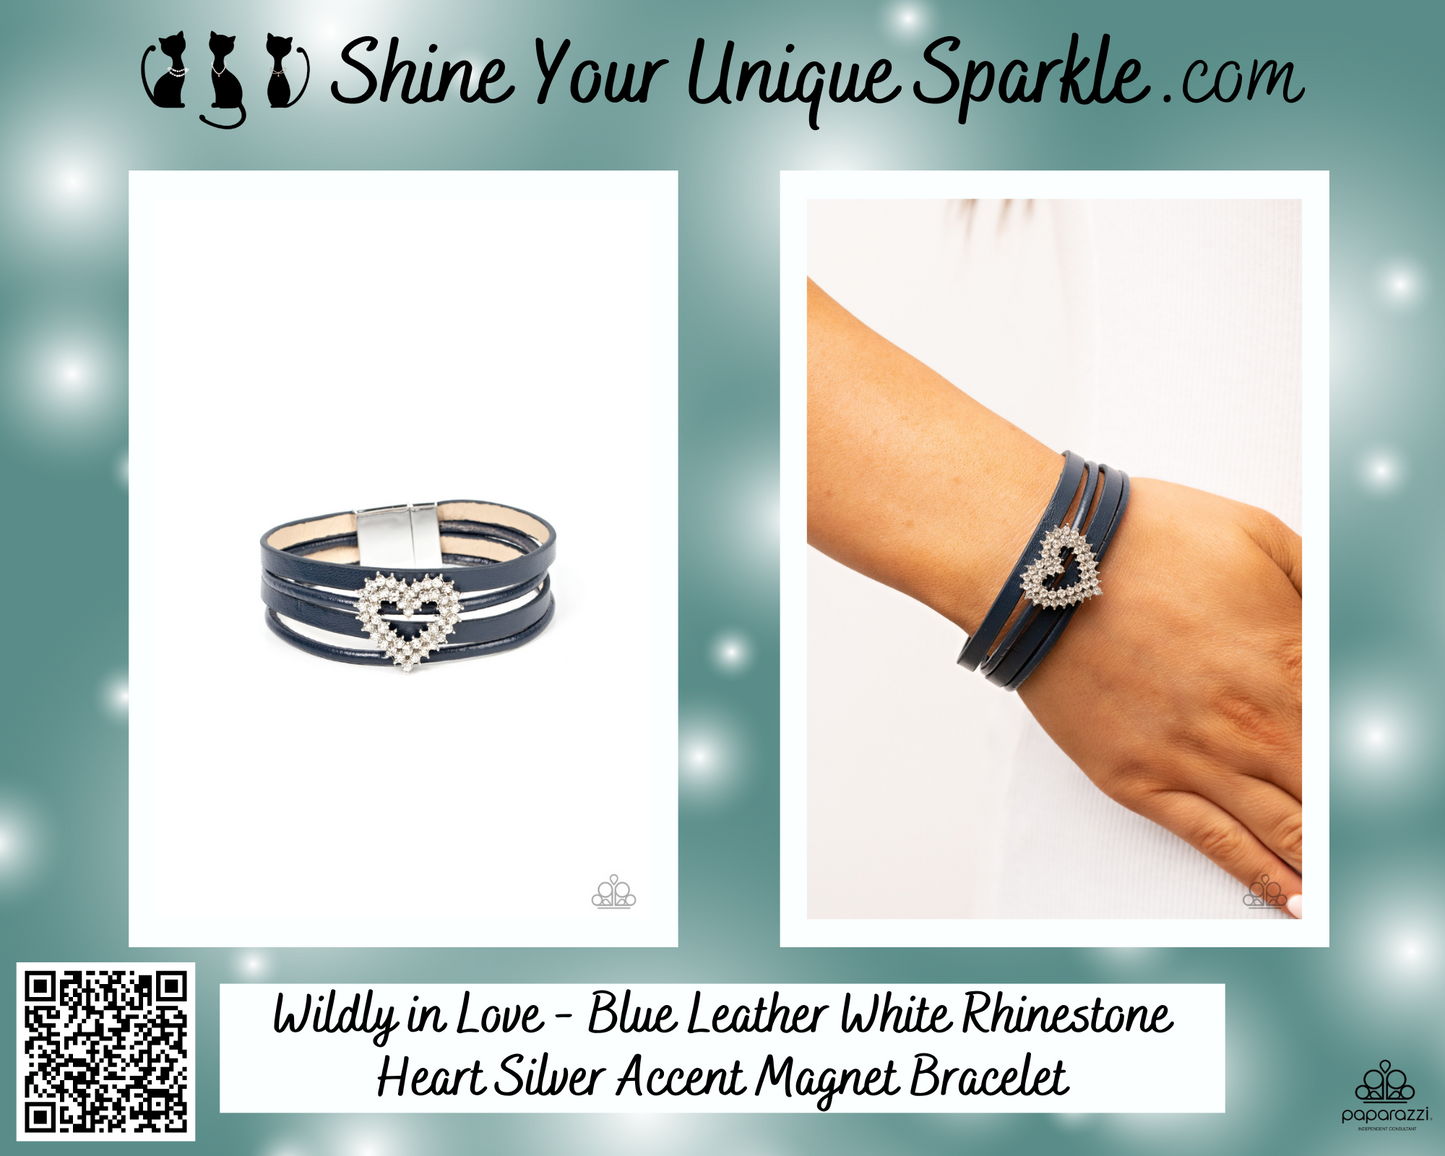 Wildly in Love - Blue Leather White Rhinestone Heart Silver Accent Magnet Bracelet